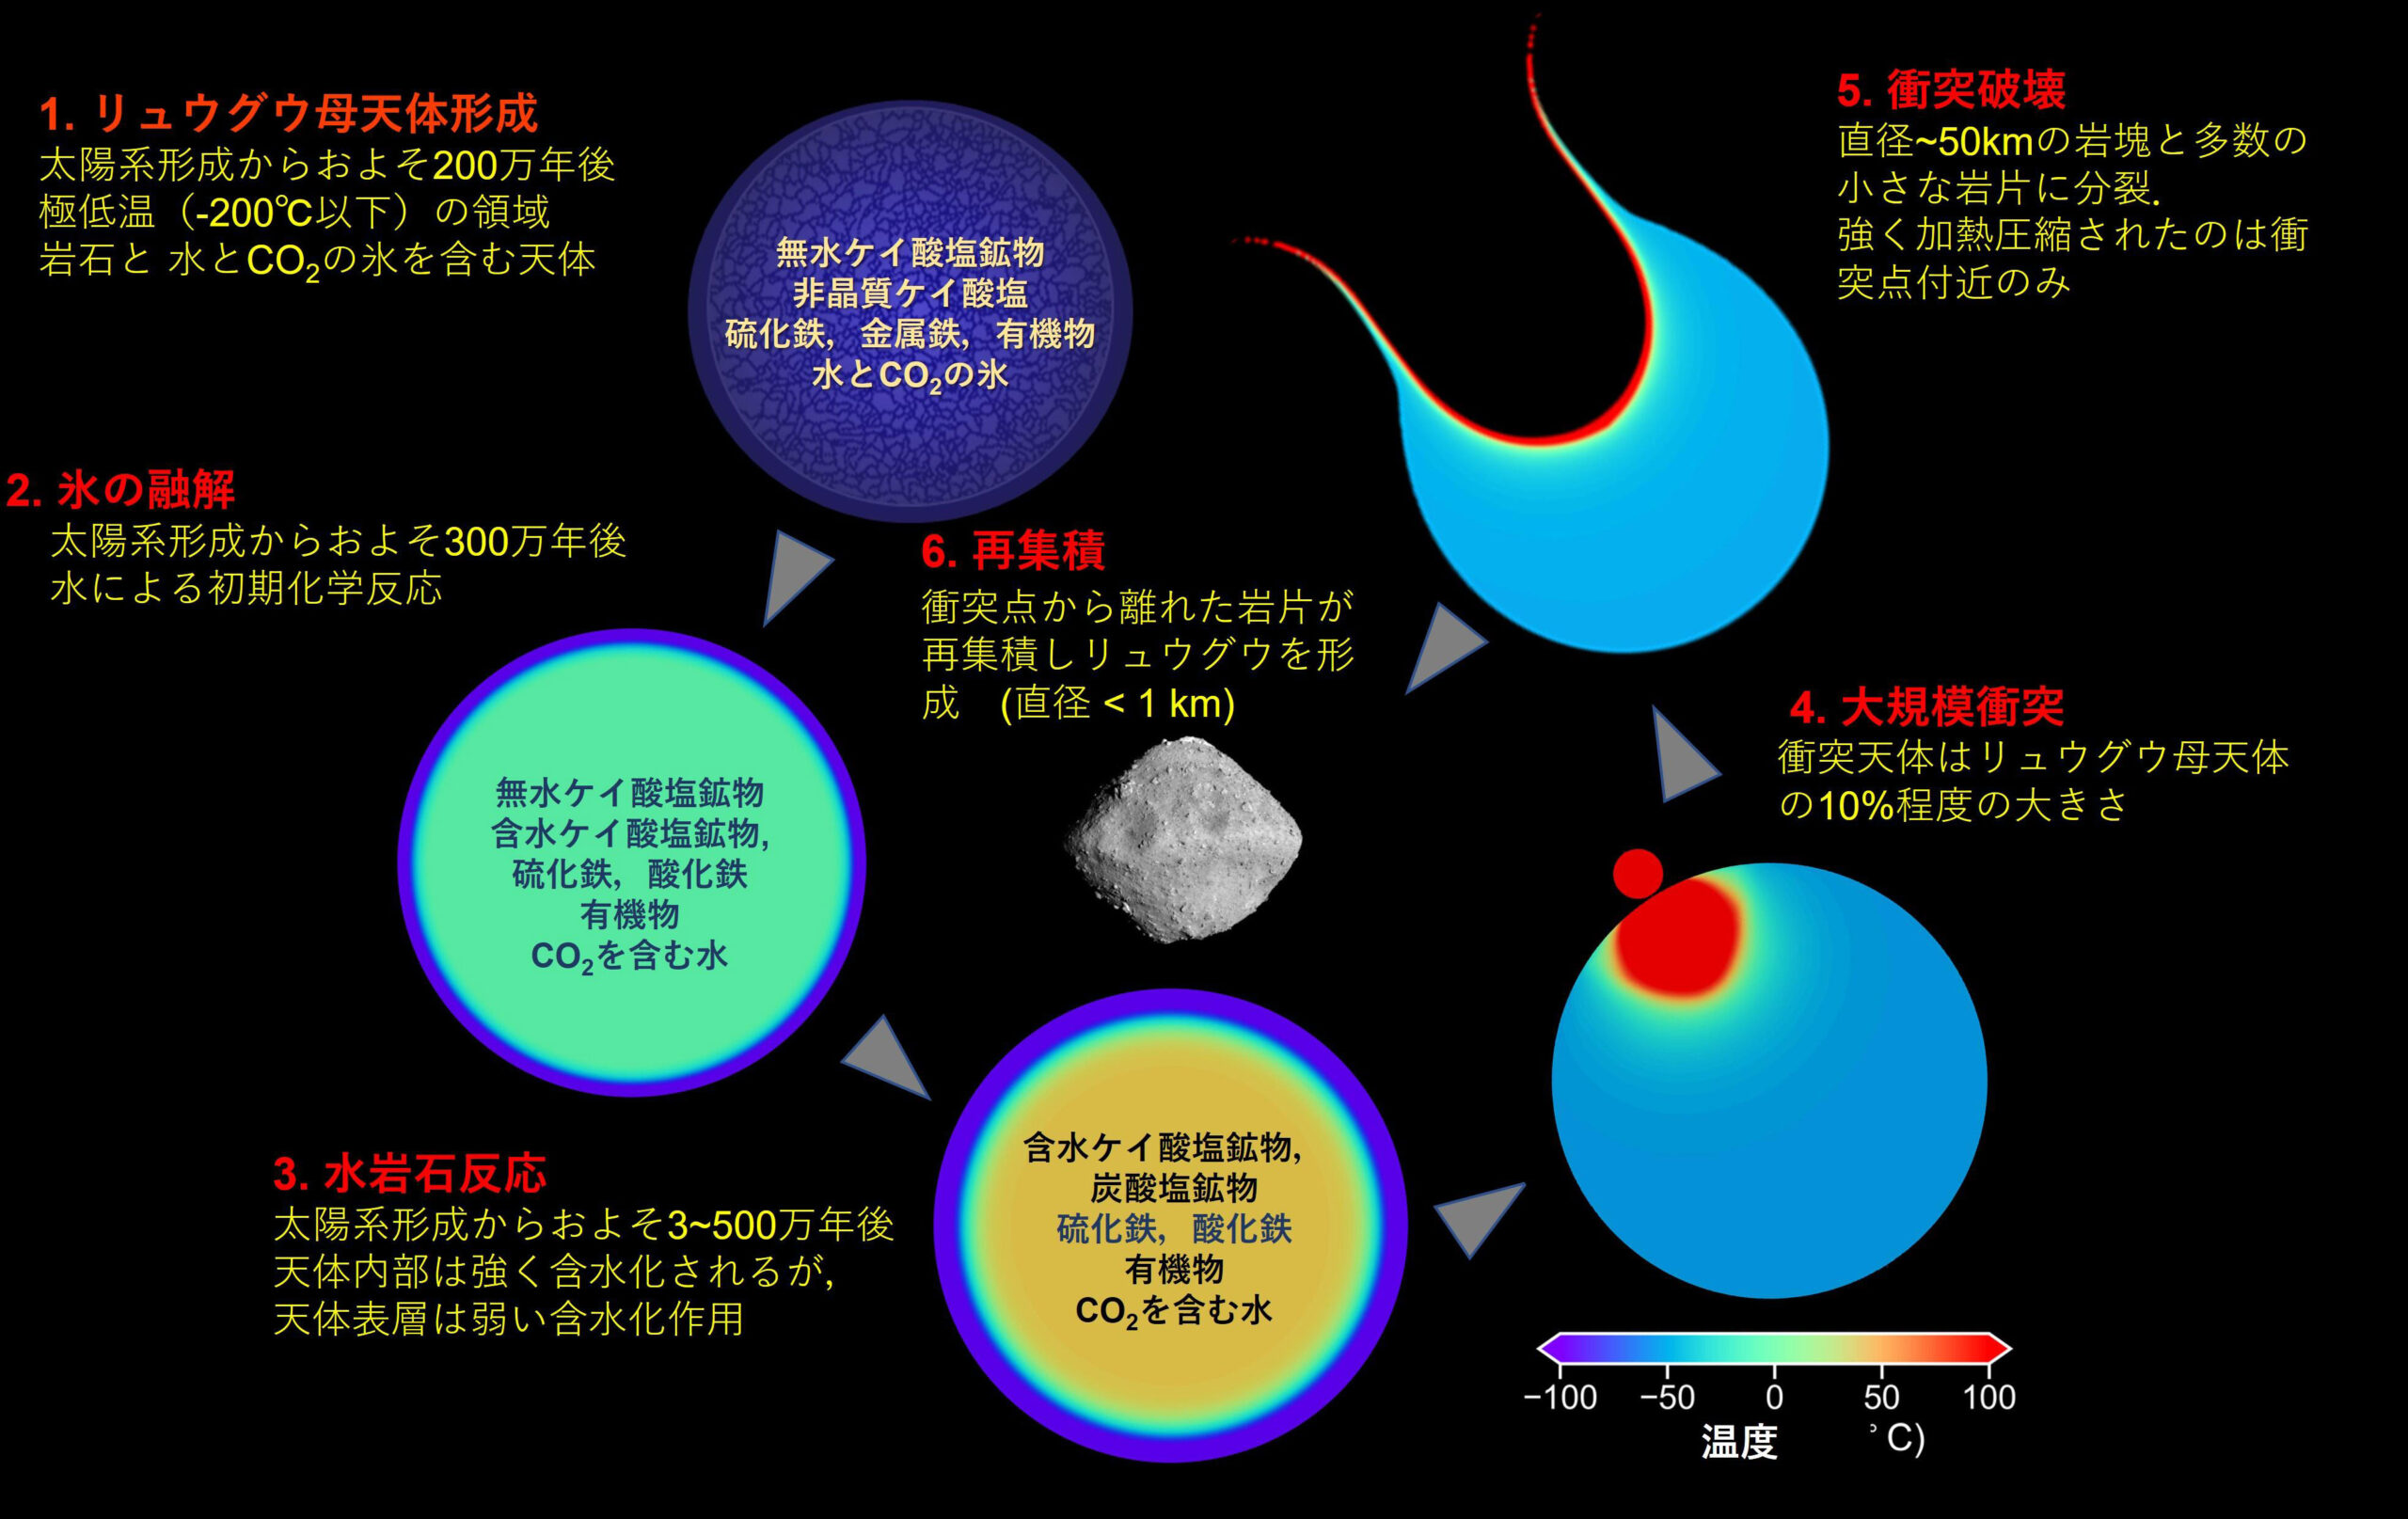 Through numerical simulation, the temperature distribution, age and collision destruction process of celestial bodies are calculated